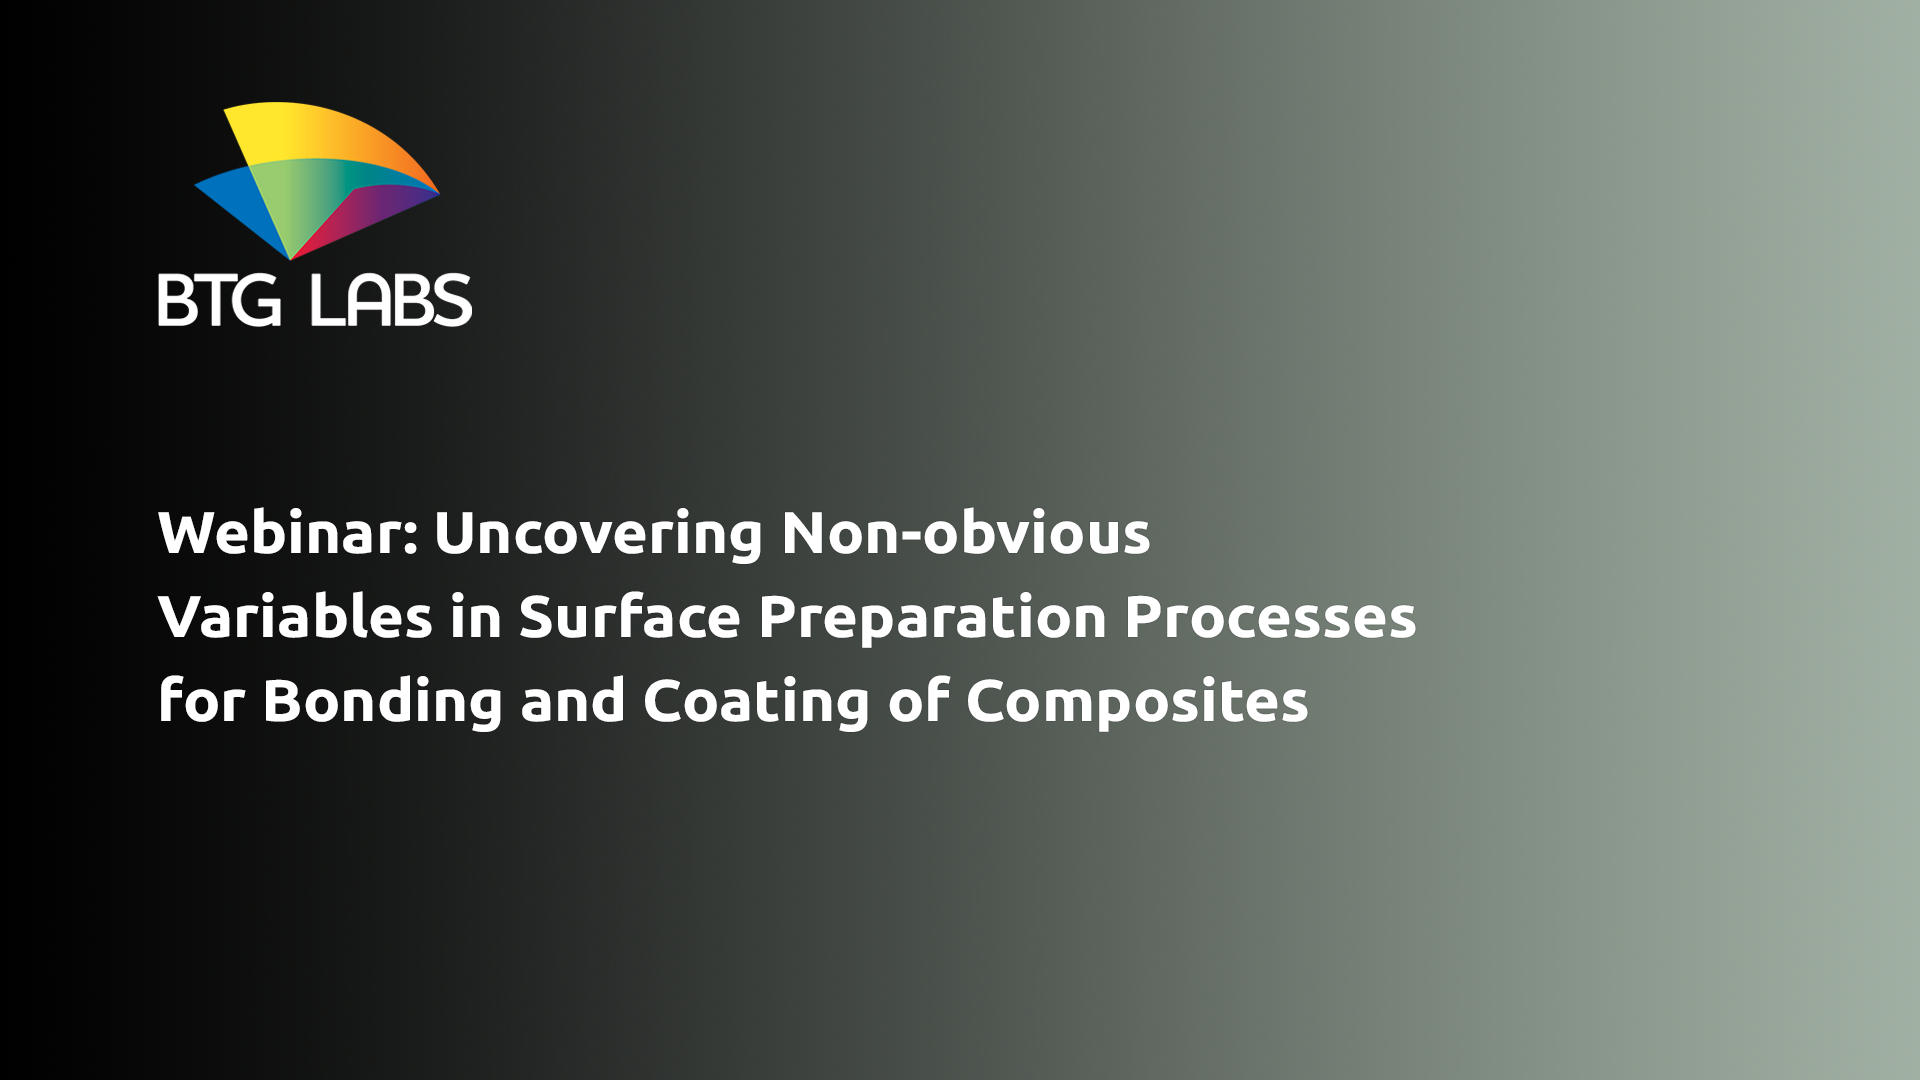 Webinar: Uncovering Non-obvious Variables in Surface Preparation Processes for Bonding and Coating of Composites